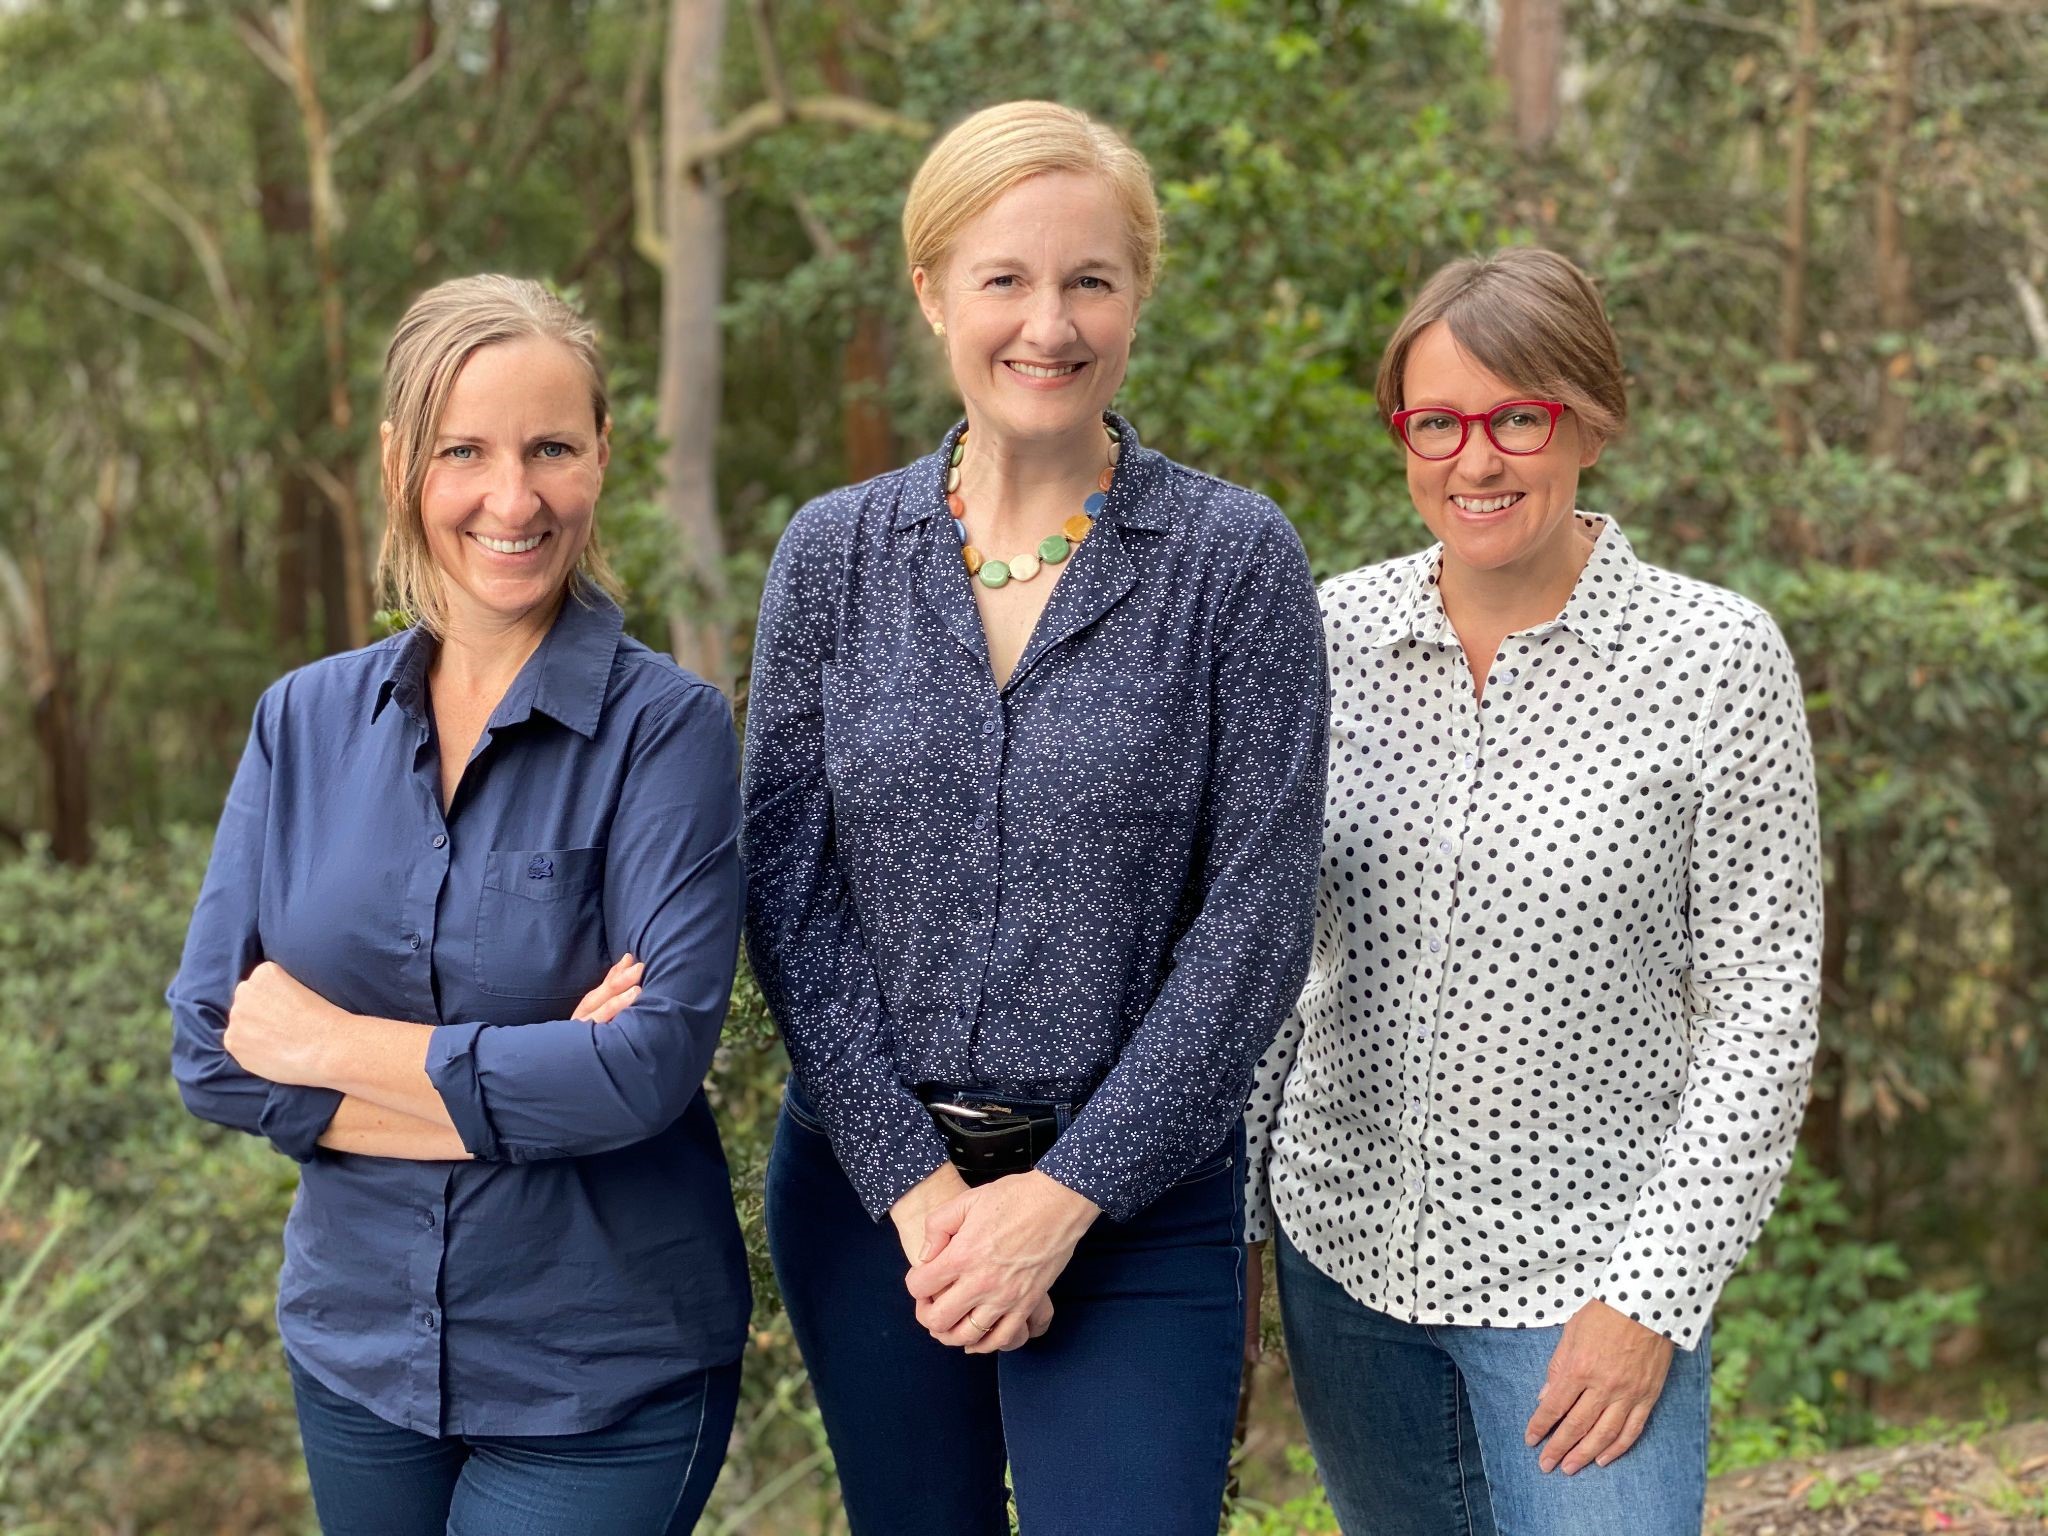 2021 Greens candidates for Bayside Council